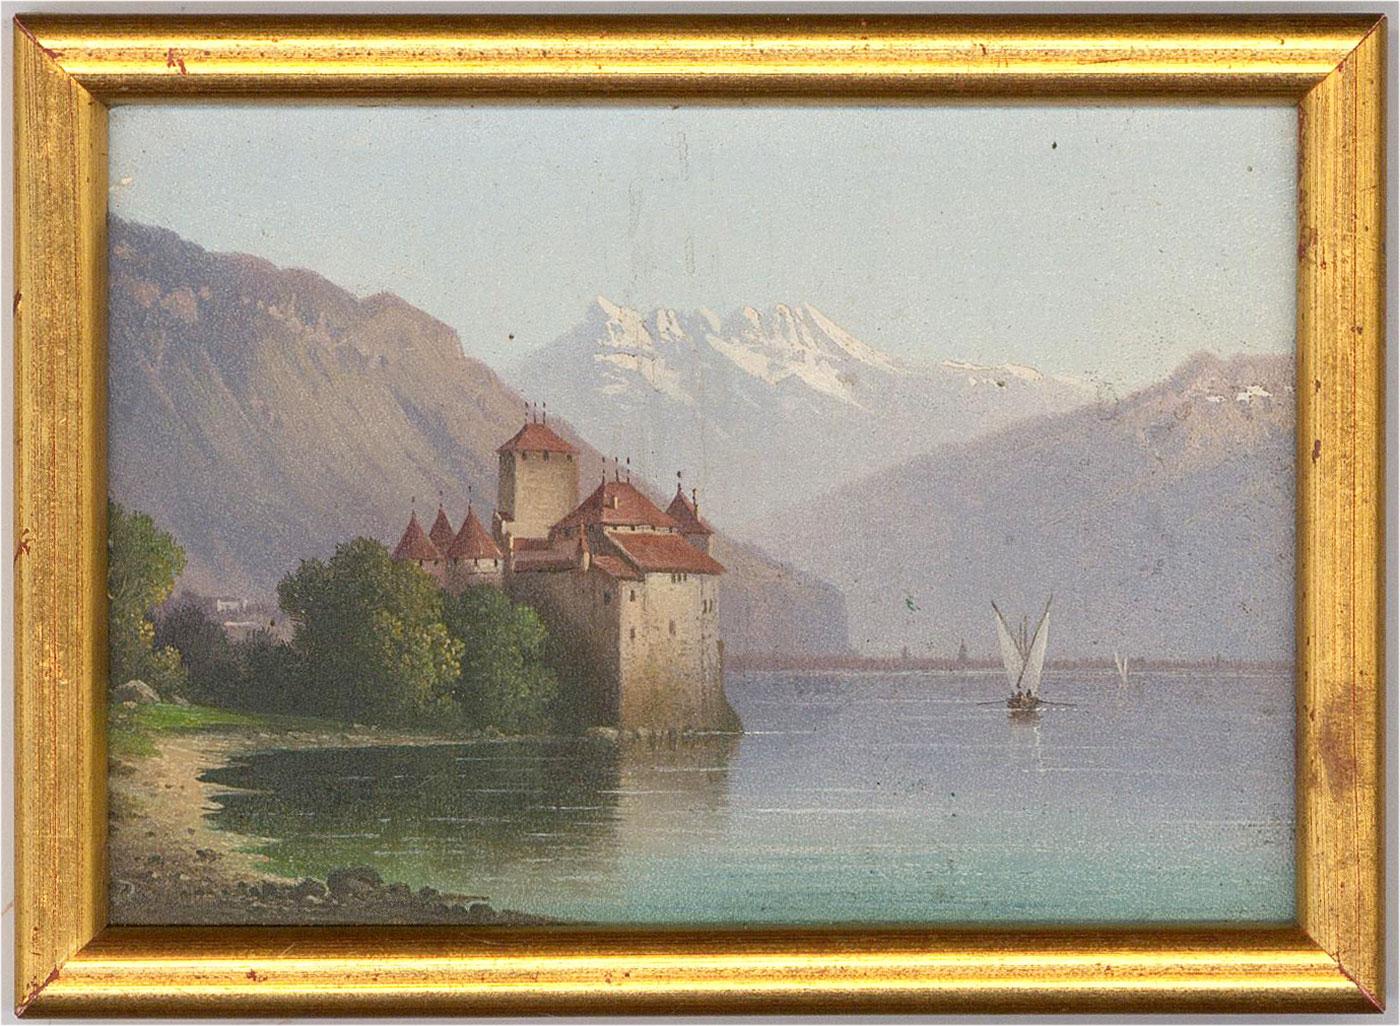 An interesting oil on board of Chillon Castle located on an Island in Lake Geneva, in the background we can see the Alpine valley of Rhône. The charming size of this oil on board adds much decorative charm to the, already very accomplished, scene.